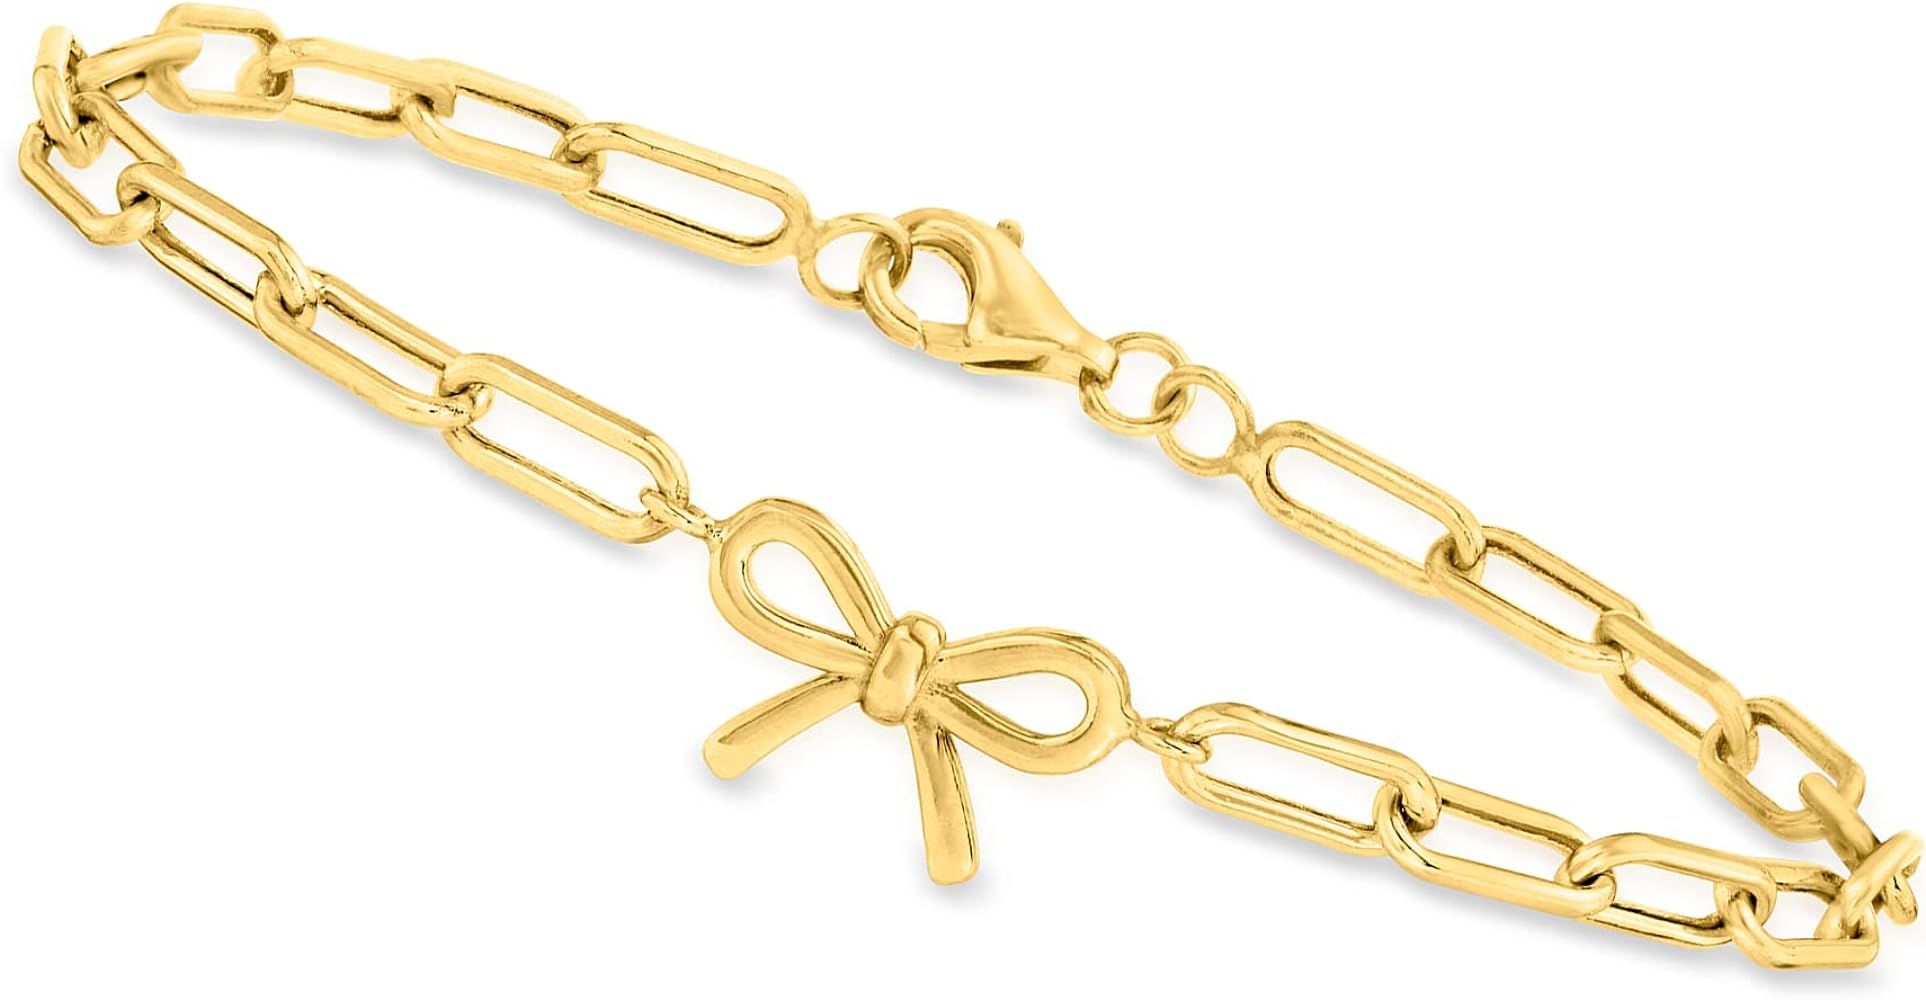 Canaria 10kt Yellow Gold Bow Charm Paper Clip Link Bracelet. 7 inches | Amazon (US)